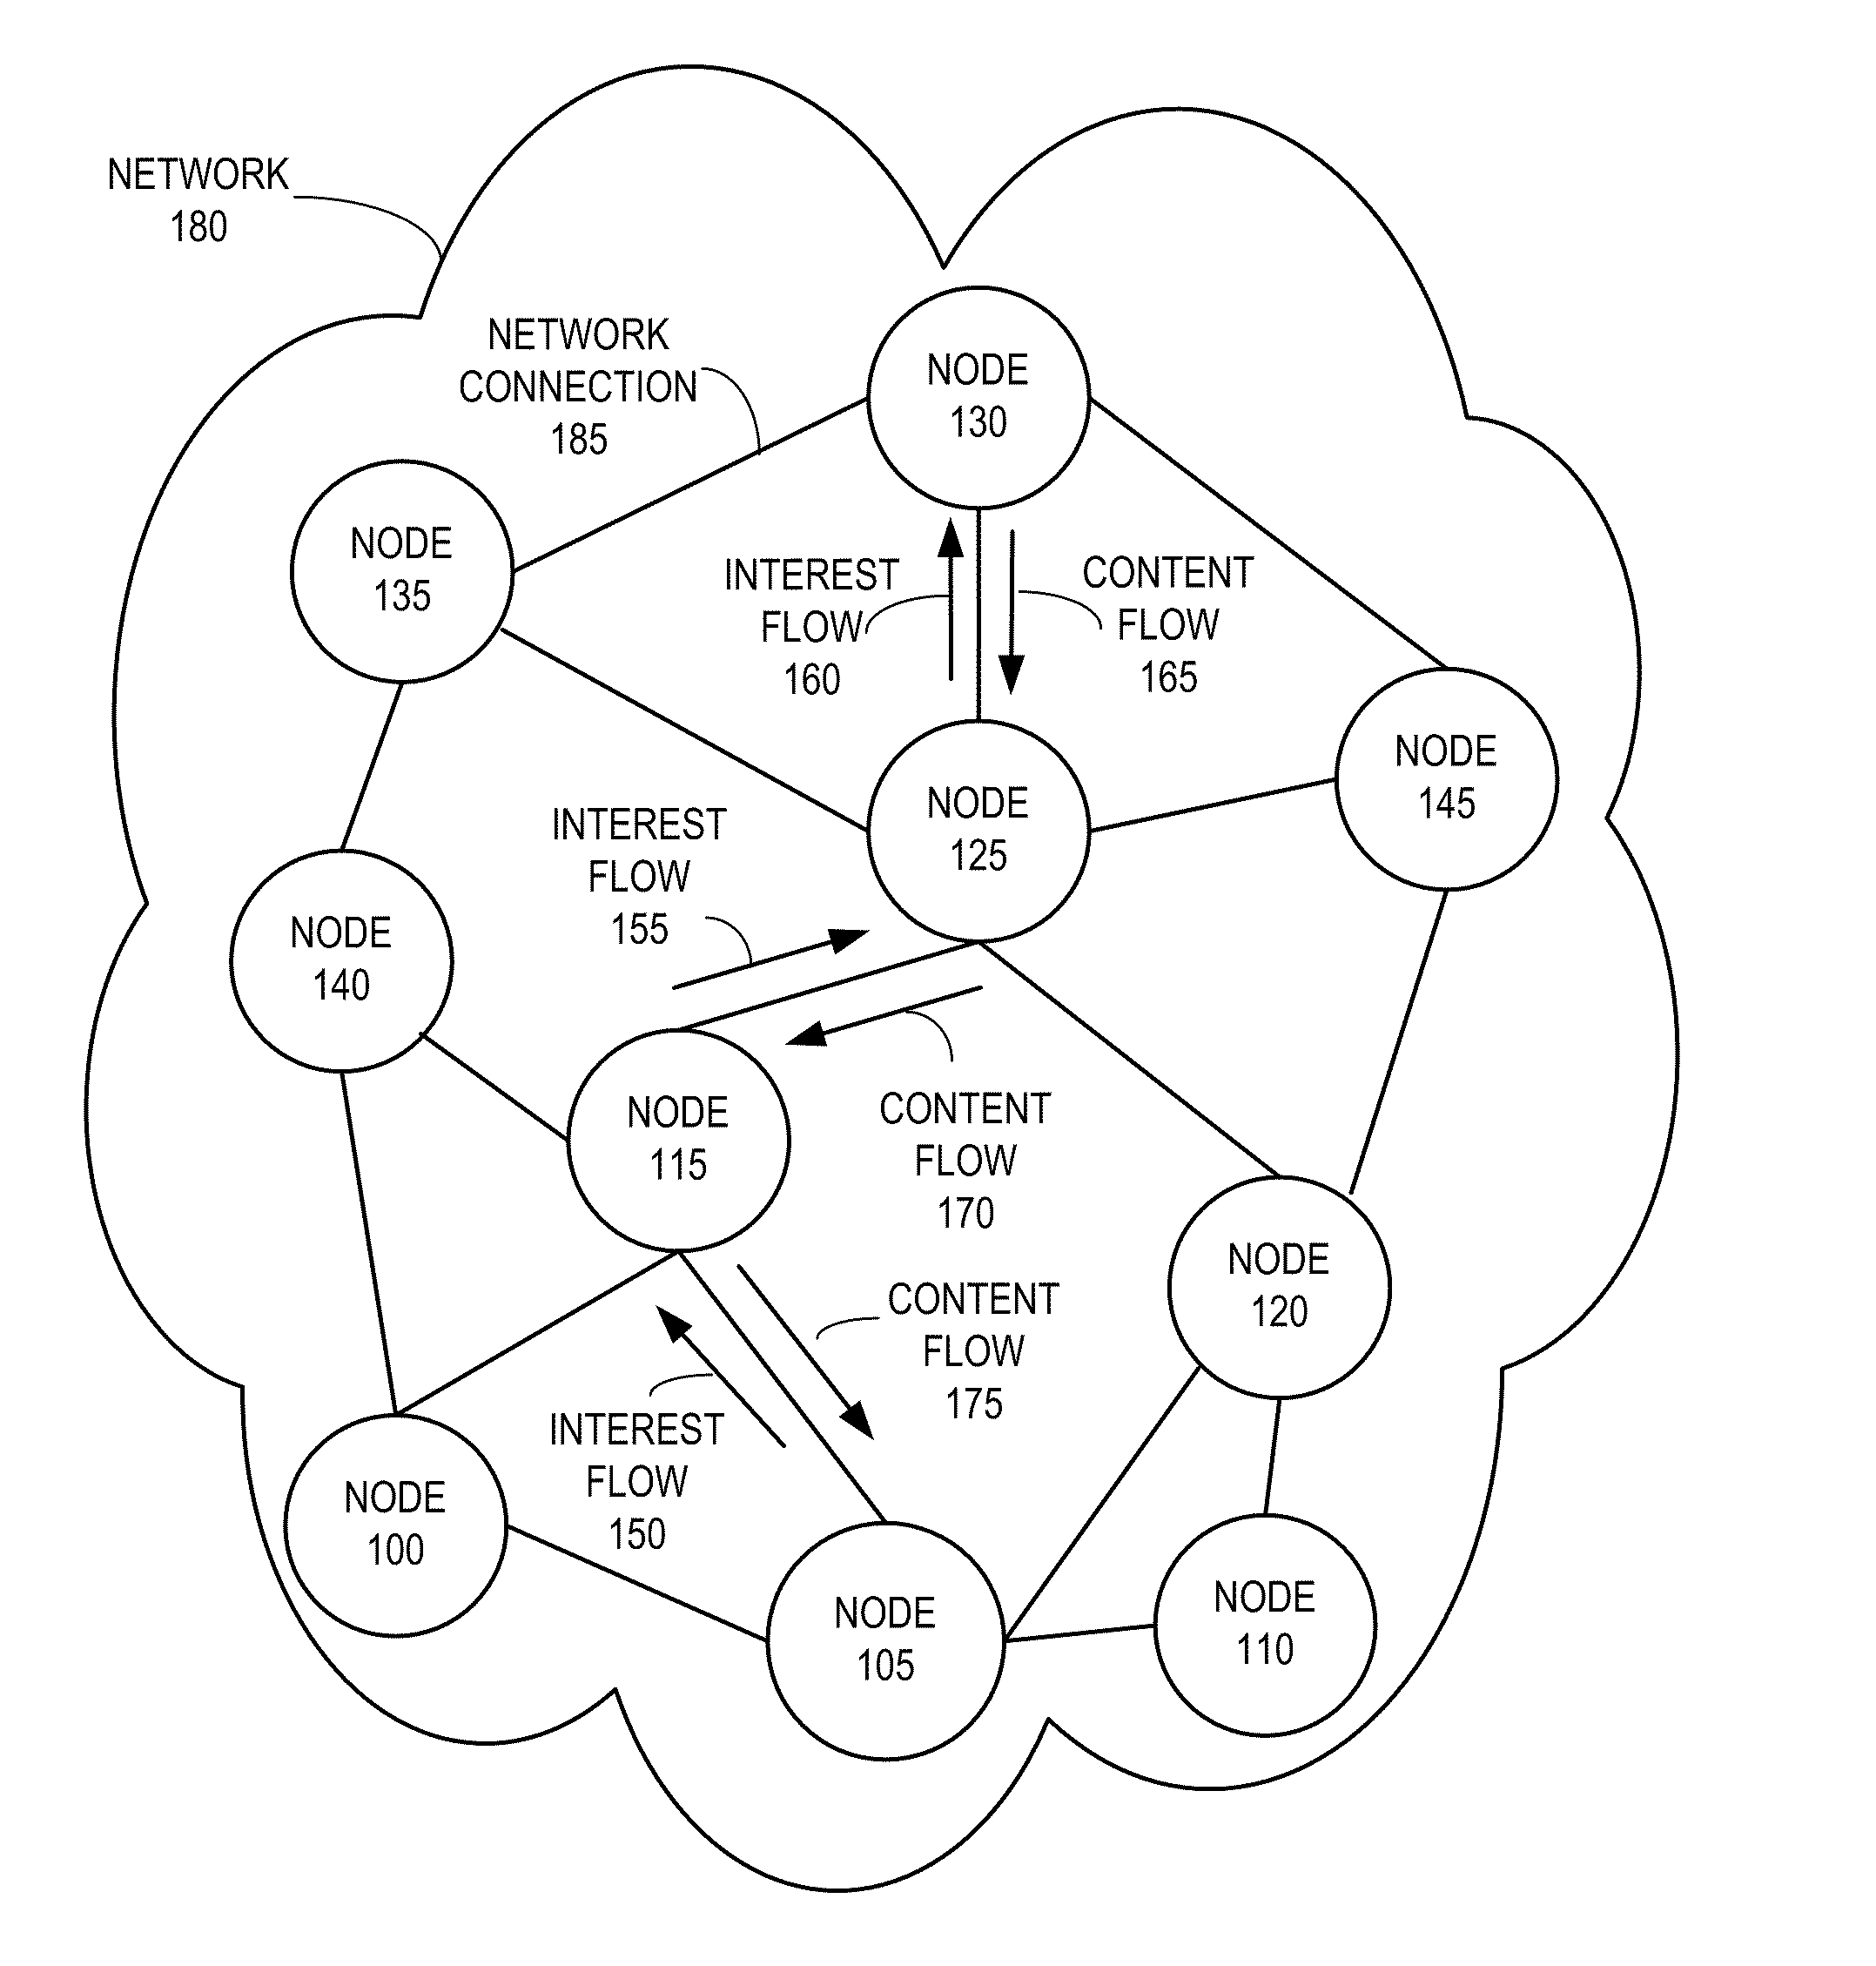 Adaptive multi-interface use for content networking